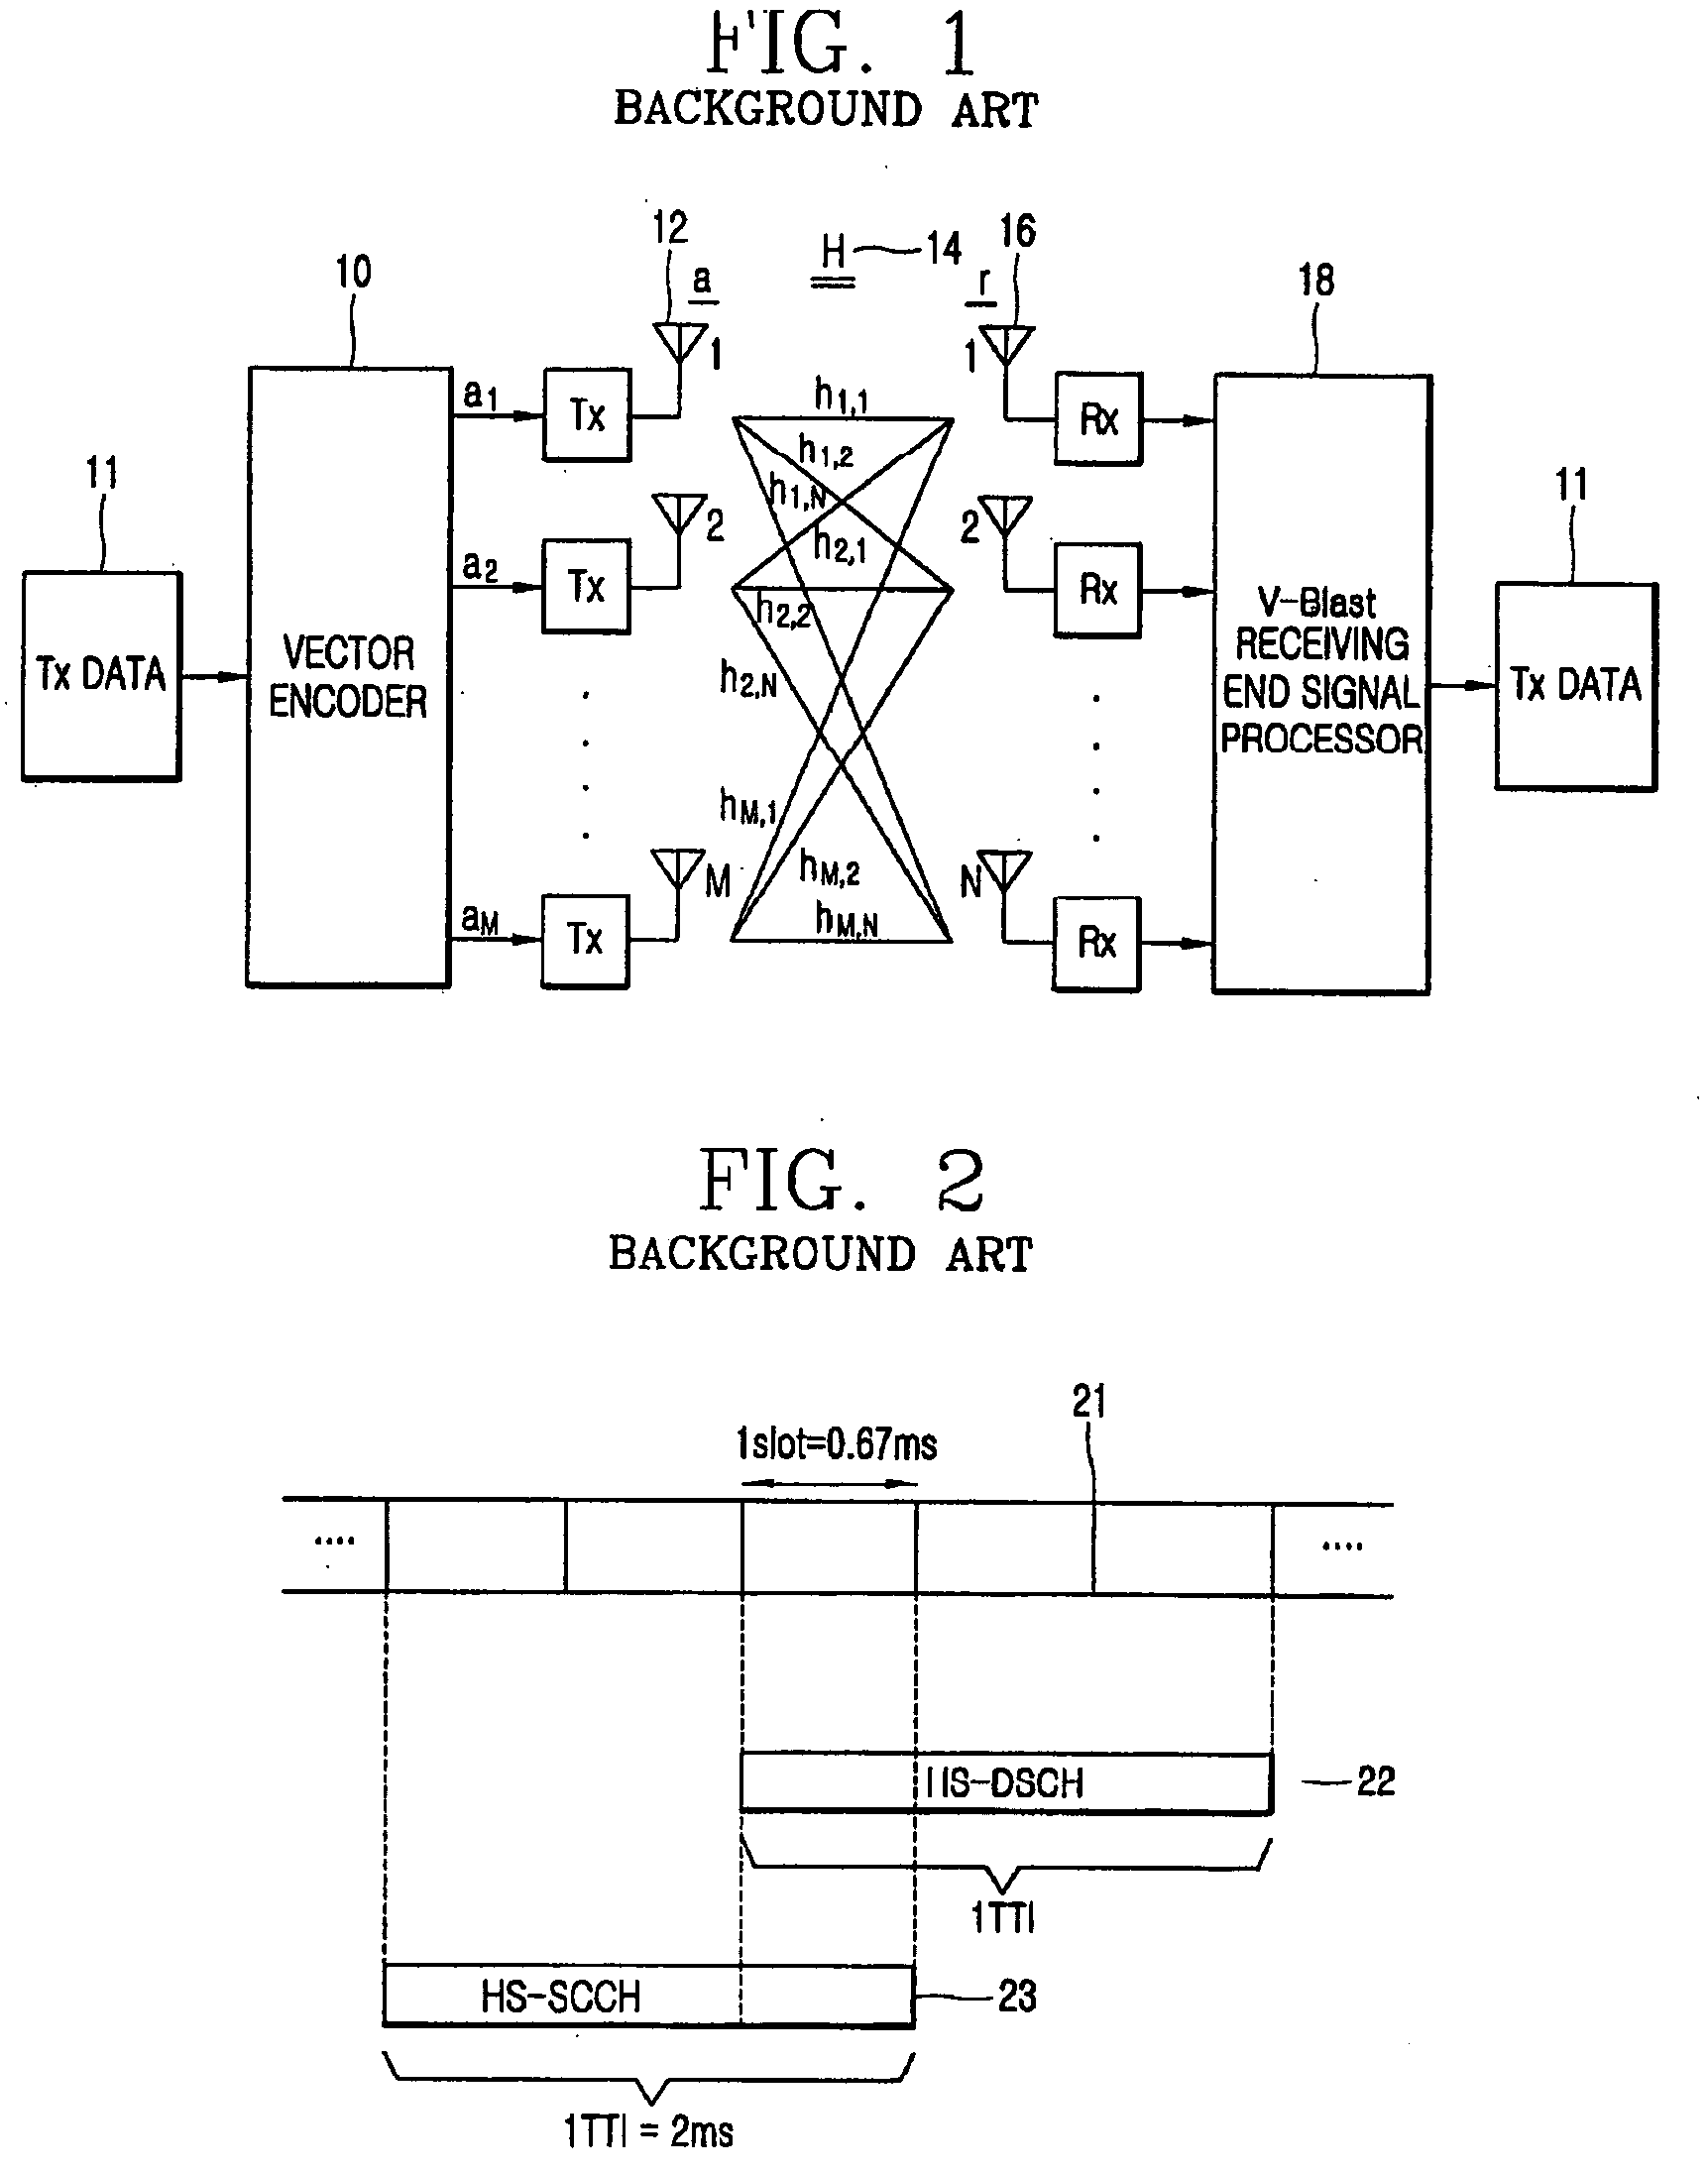 Transmission method for downlink control signal in MIMO system